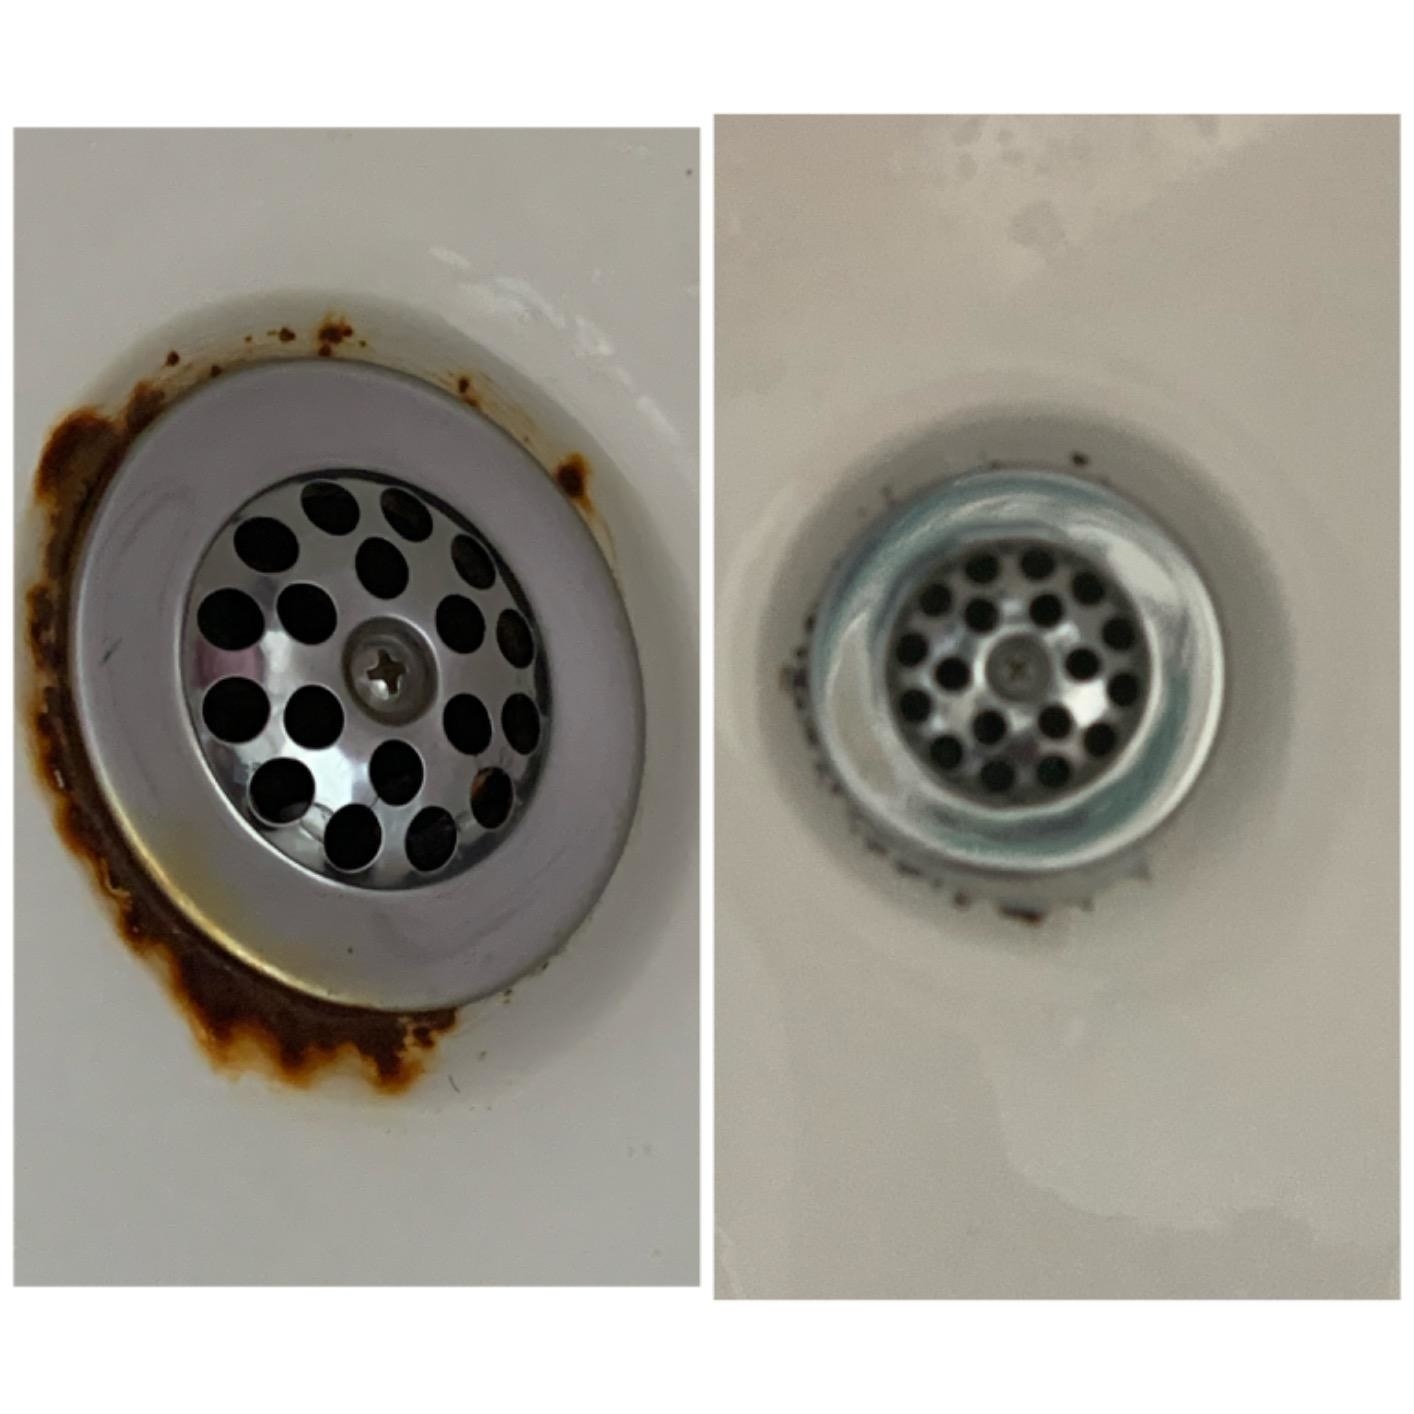 Reviewer before-and-after photo showing a rust ring around a faucet and a rust-free faucet after using the product